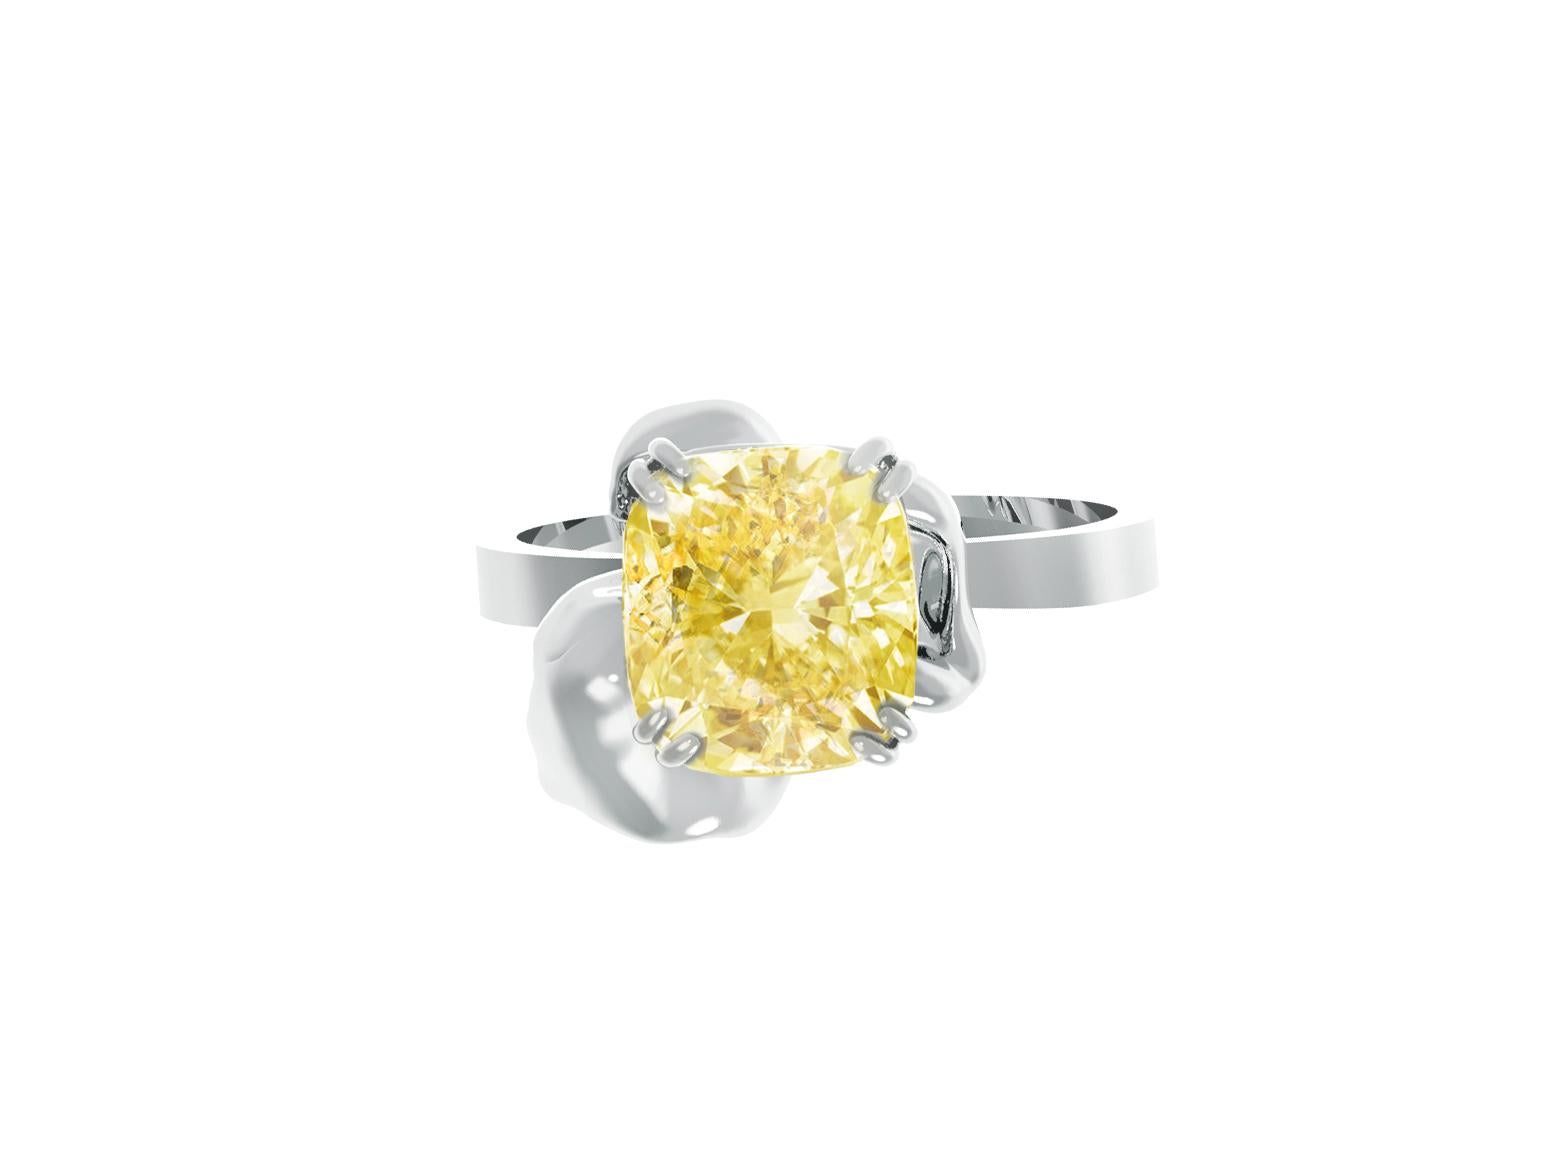 18 Karat Gold Ring with GIA Certified One Carat Fancy Light Yellow Diamond For Sale 1